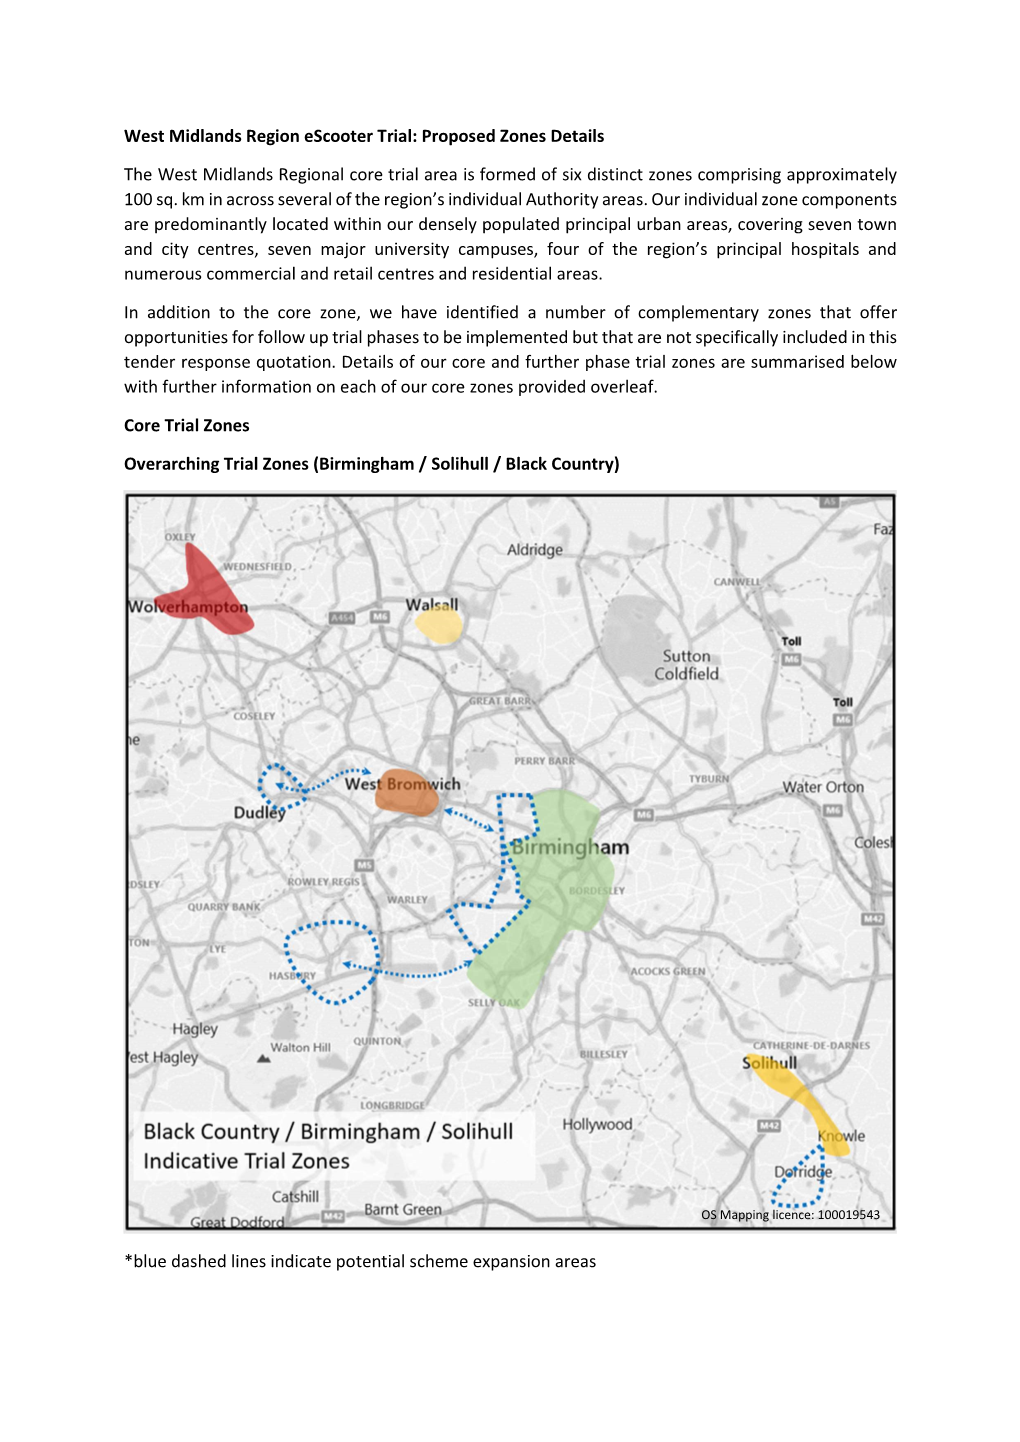 West Midlands Region Escooter Trial: Proposed Zones Details the West